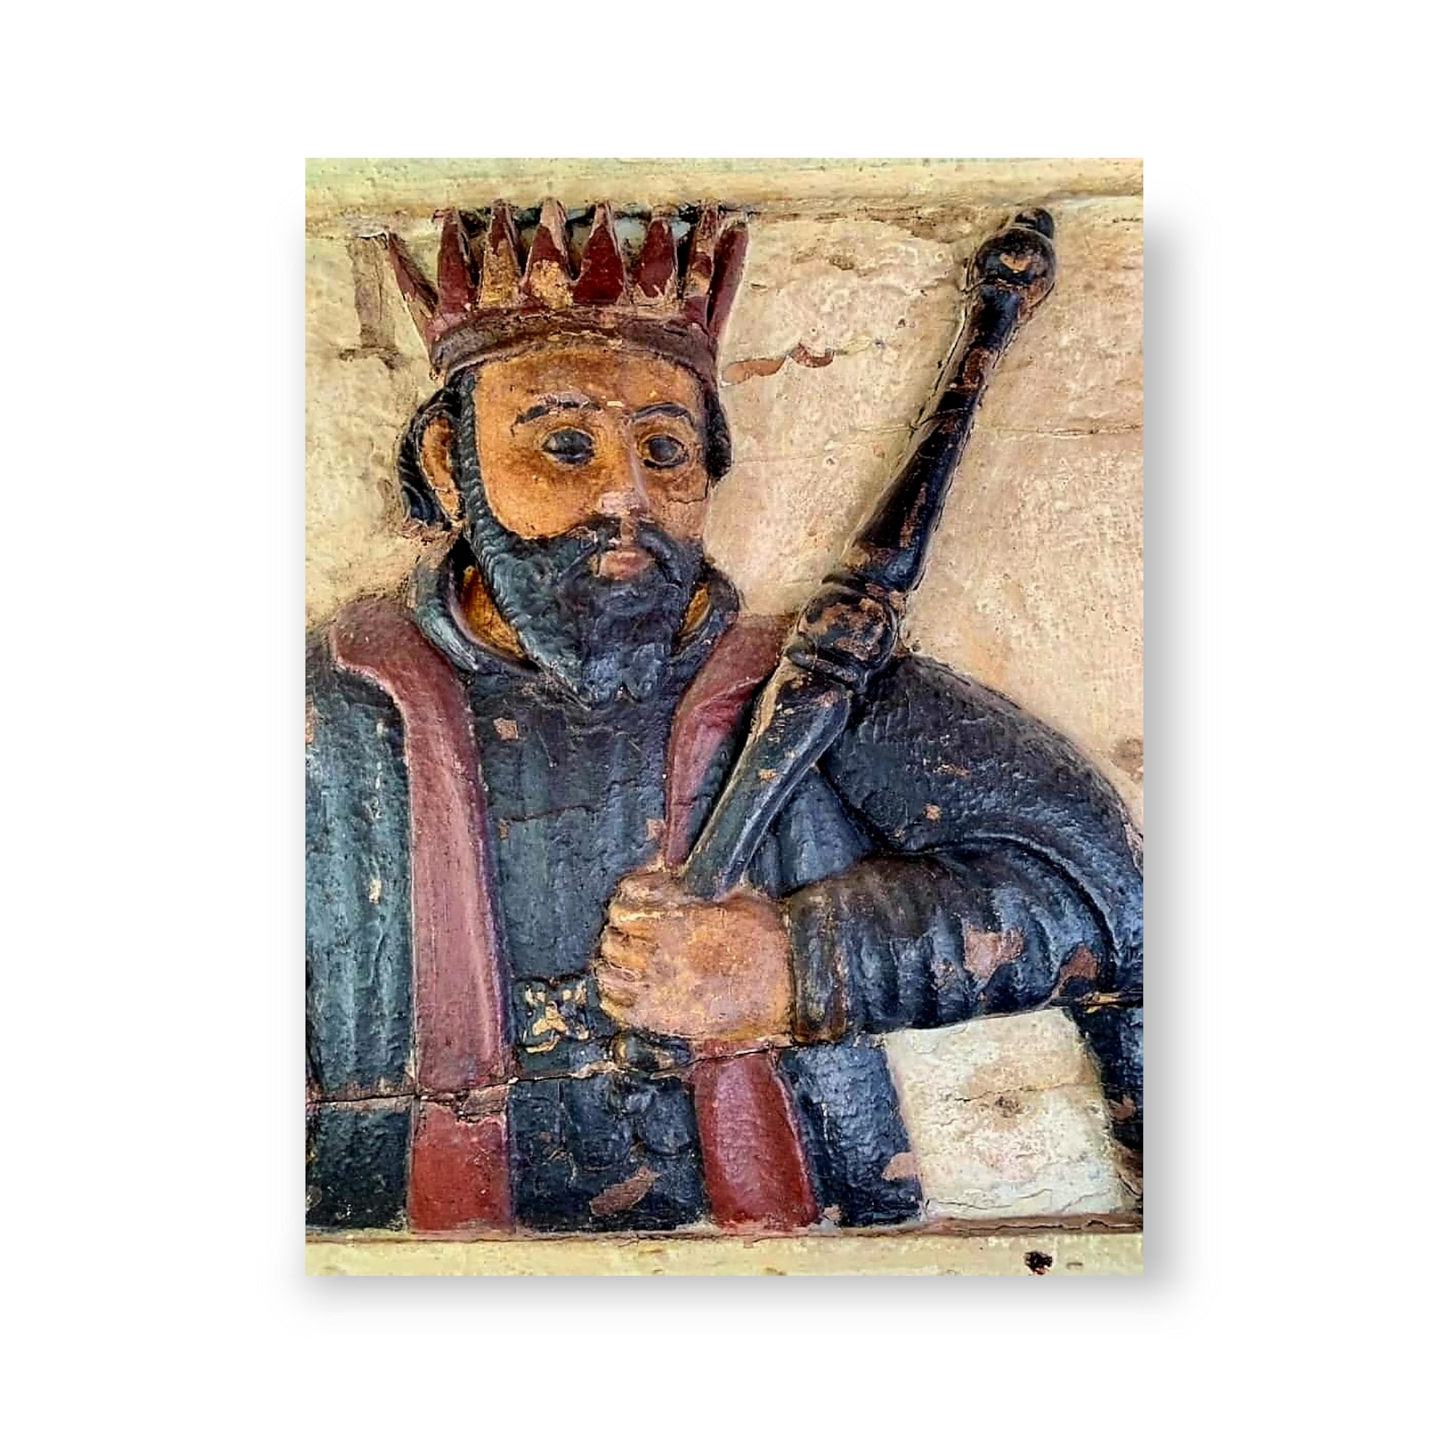 Large Mid 17th Century Indo-Portuguese Antique Carved Wooden Panel Depicting a King or Saint